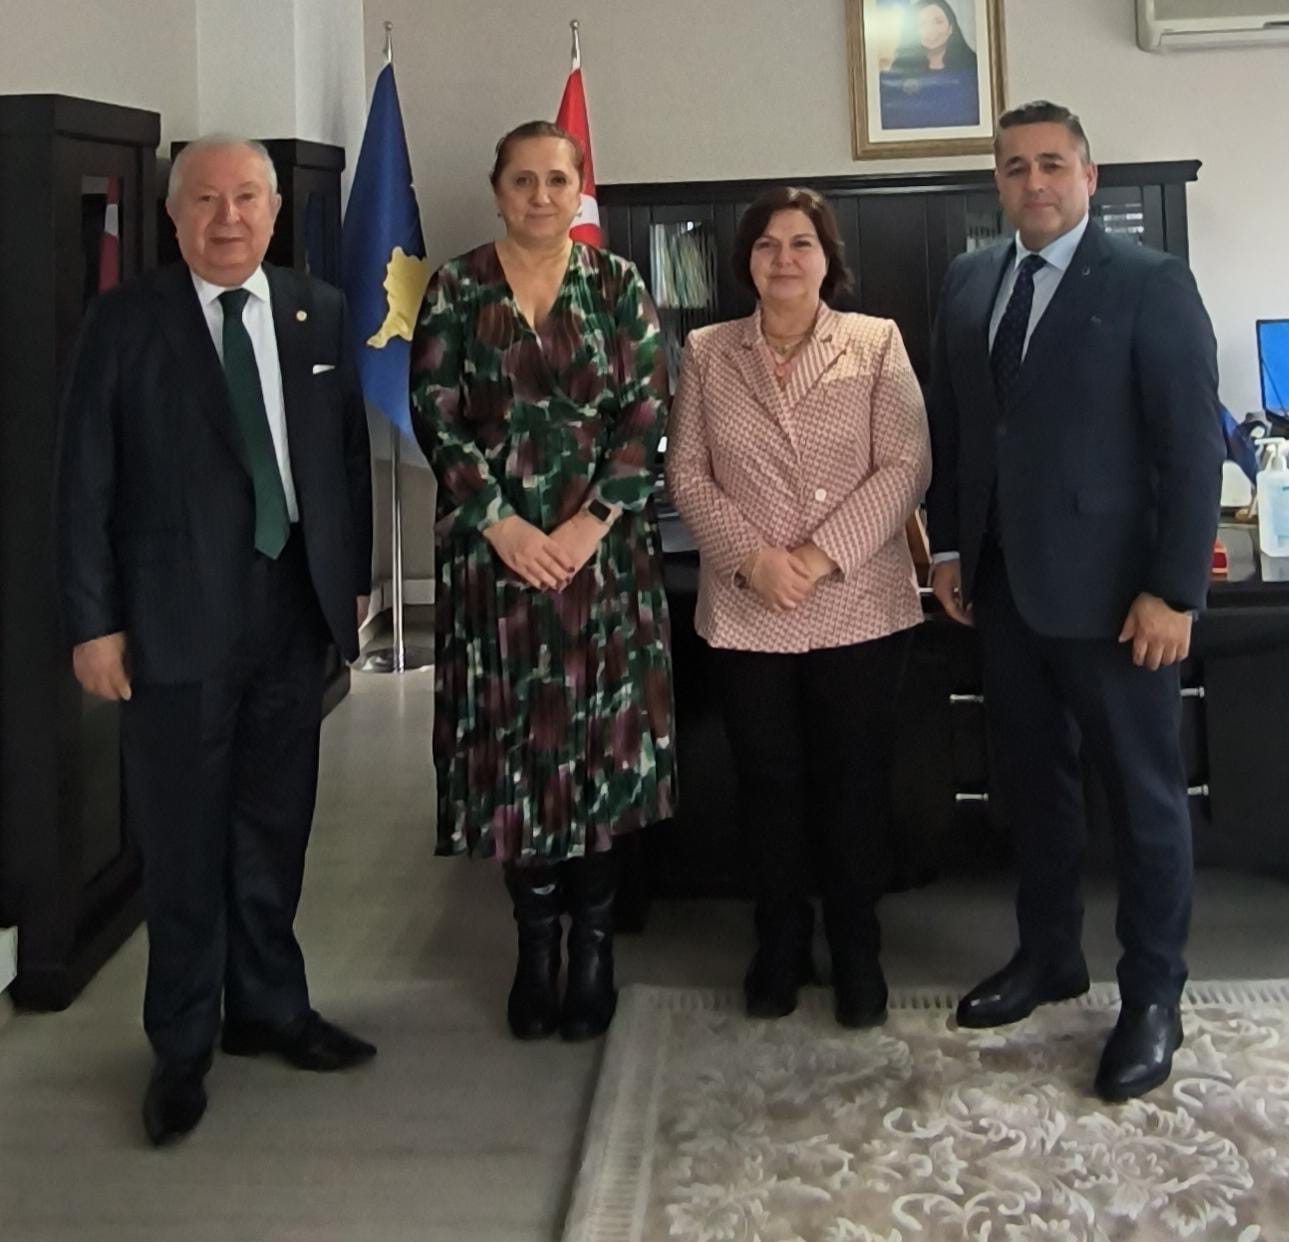 The Marmara Group Foundation visited the Consul General